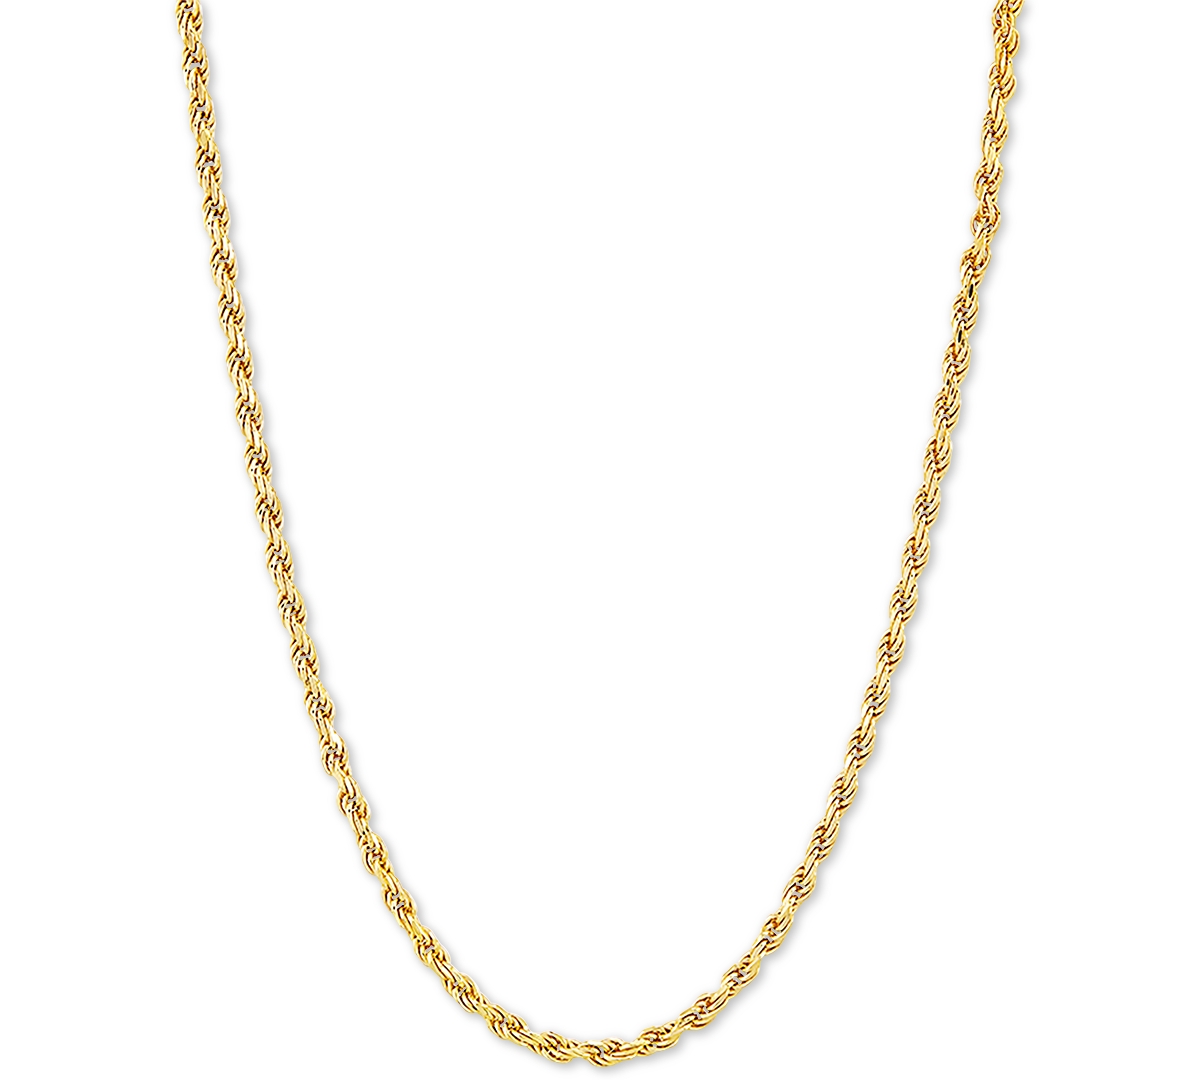 Rope 18" Chain Necklace in 18k Gold-Plated Sterling Silver - Gold Over Silver